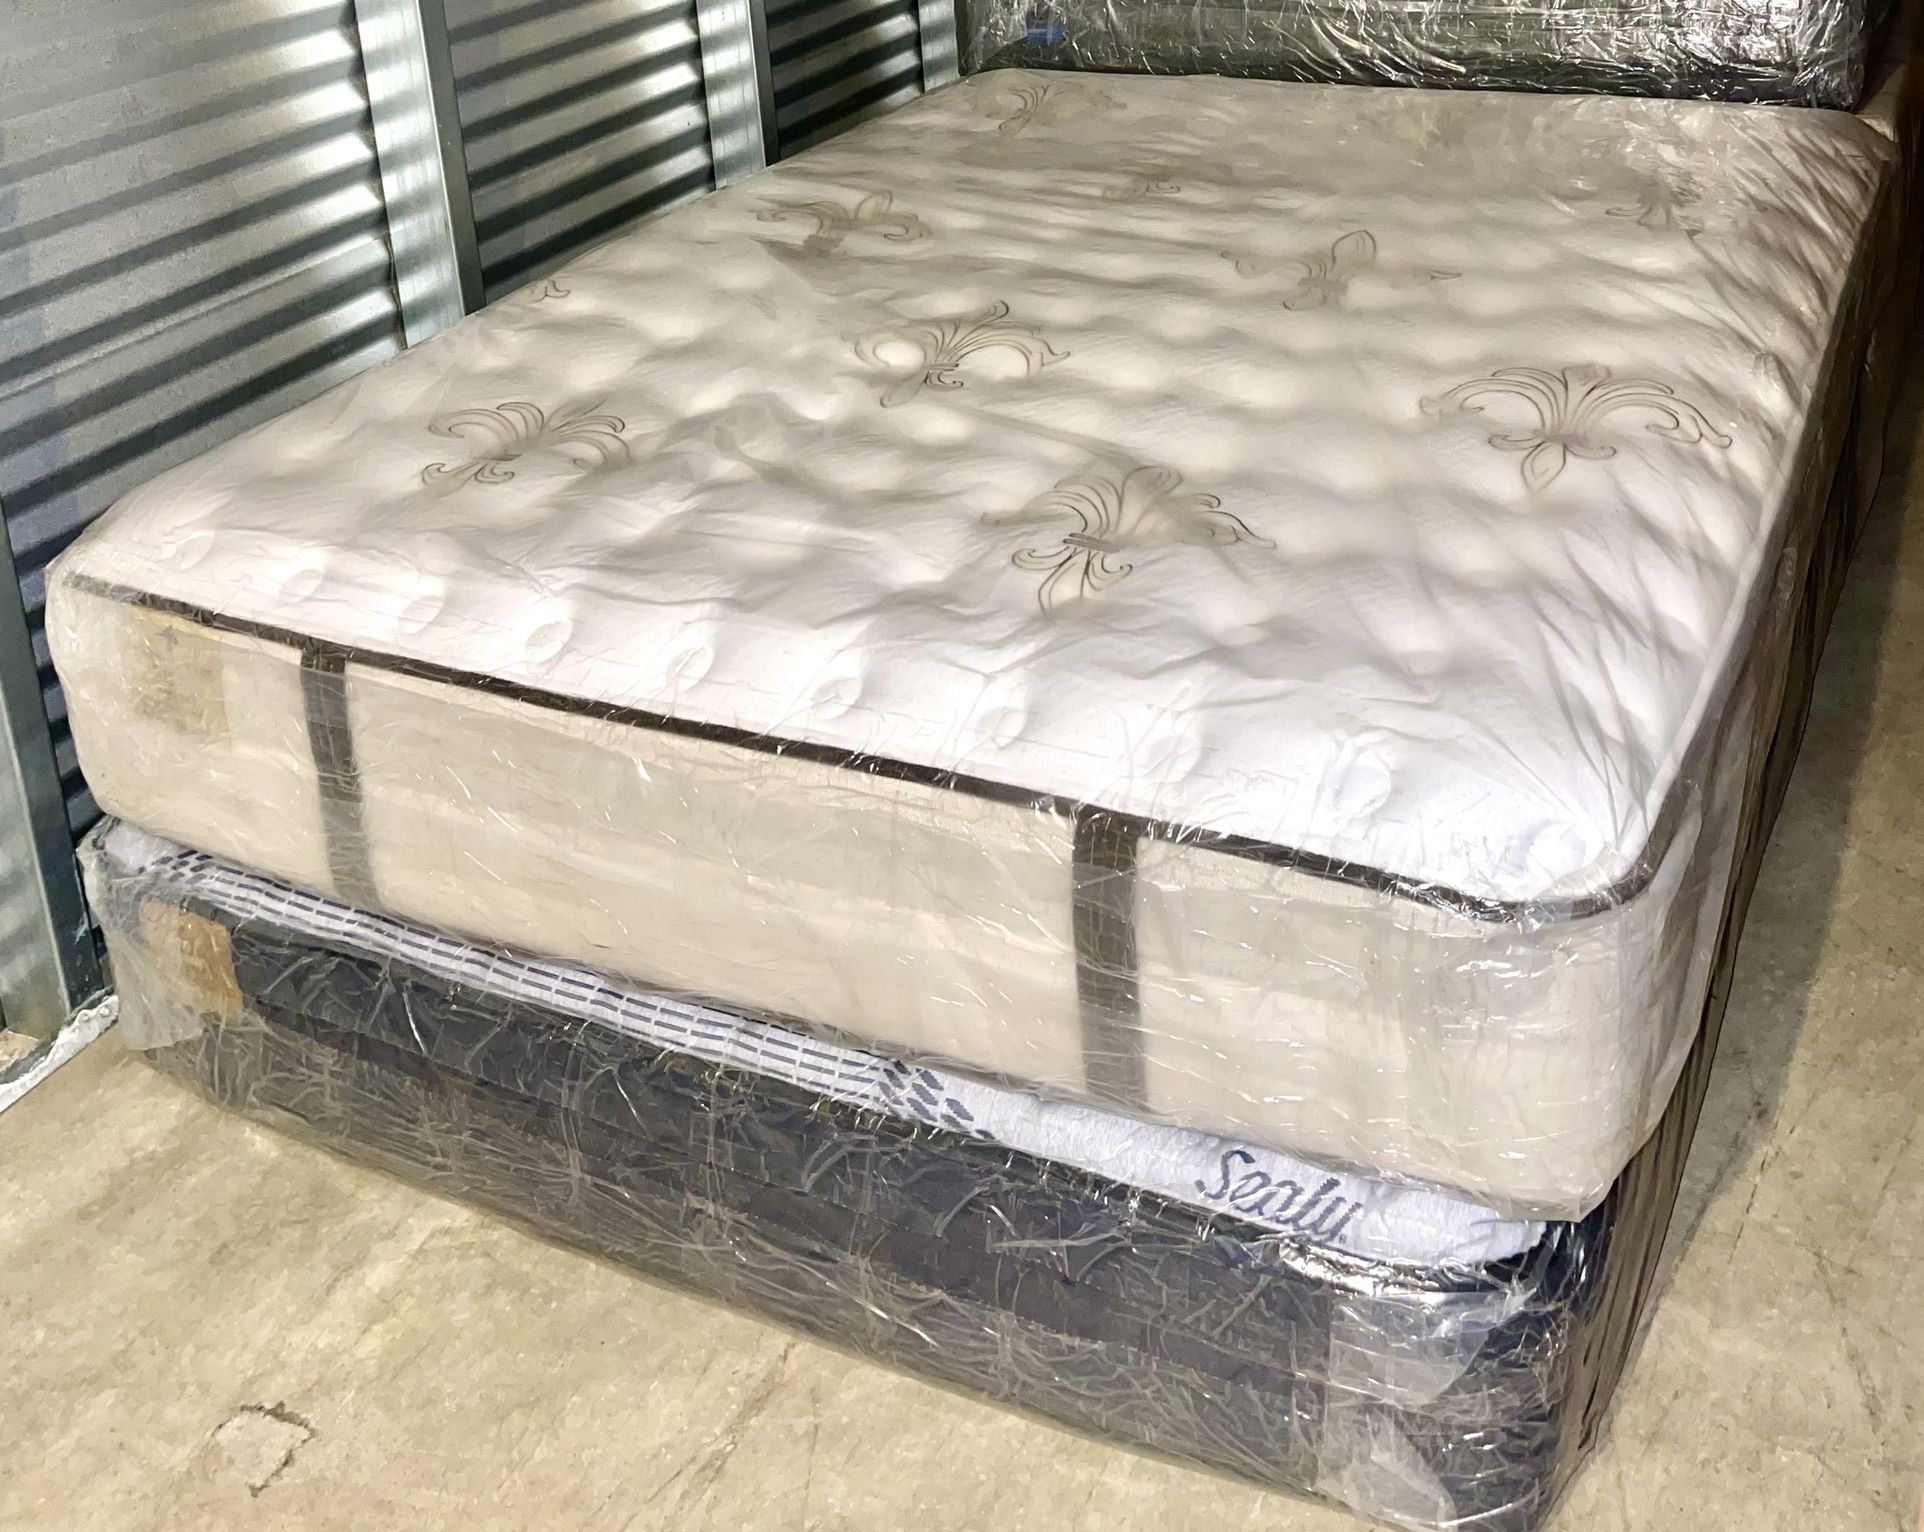 Branded Mattres Sale > New Stearns & Foster Queen Size Mattress - Delivery Available To All Cities 🚚